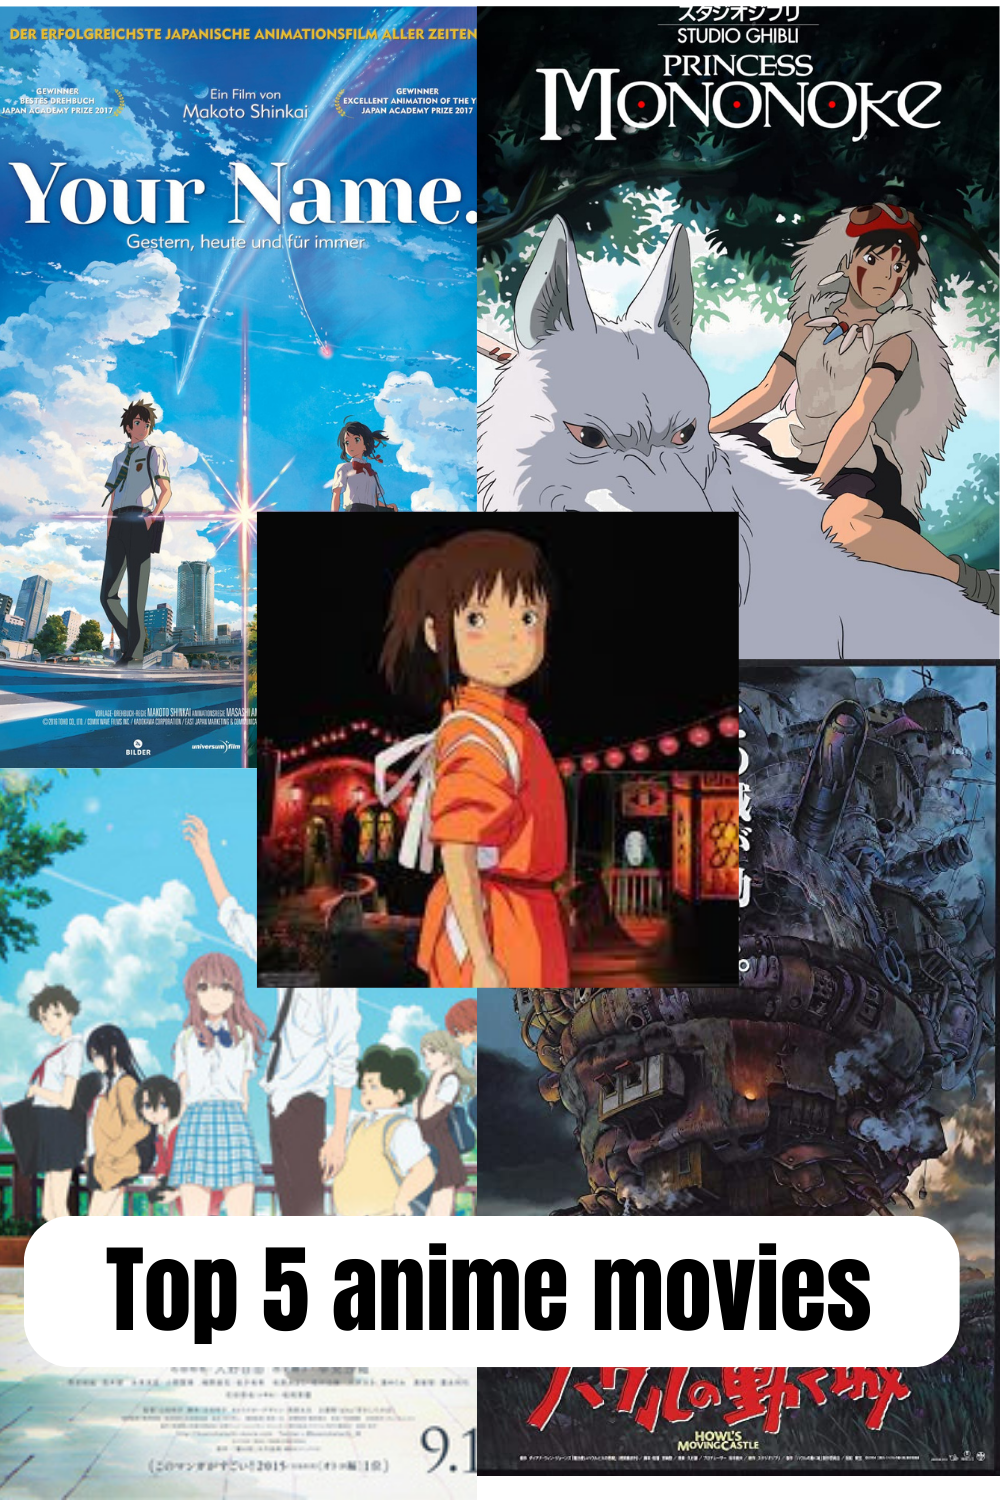 HSMediaNerd: Book, Anime, and Movie Reviews: Anime Review